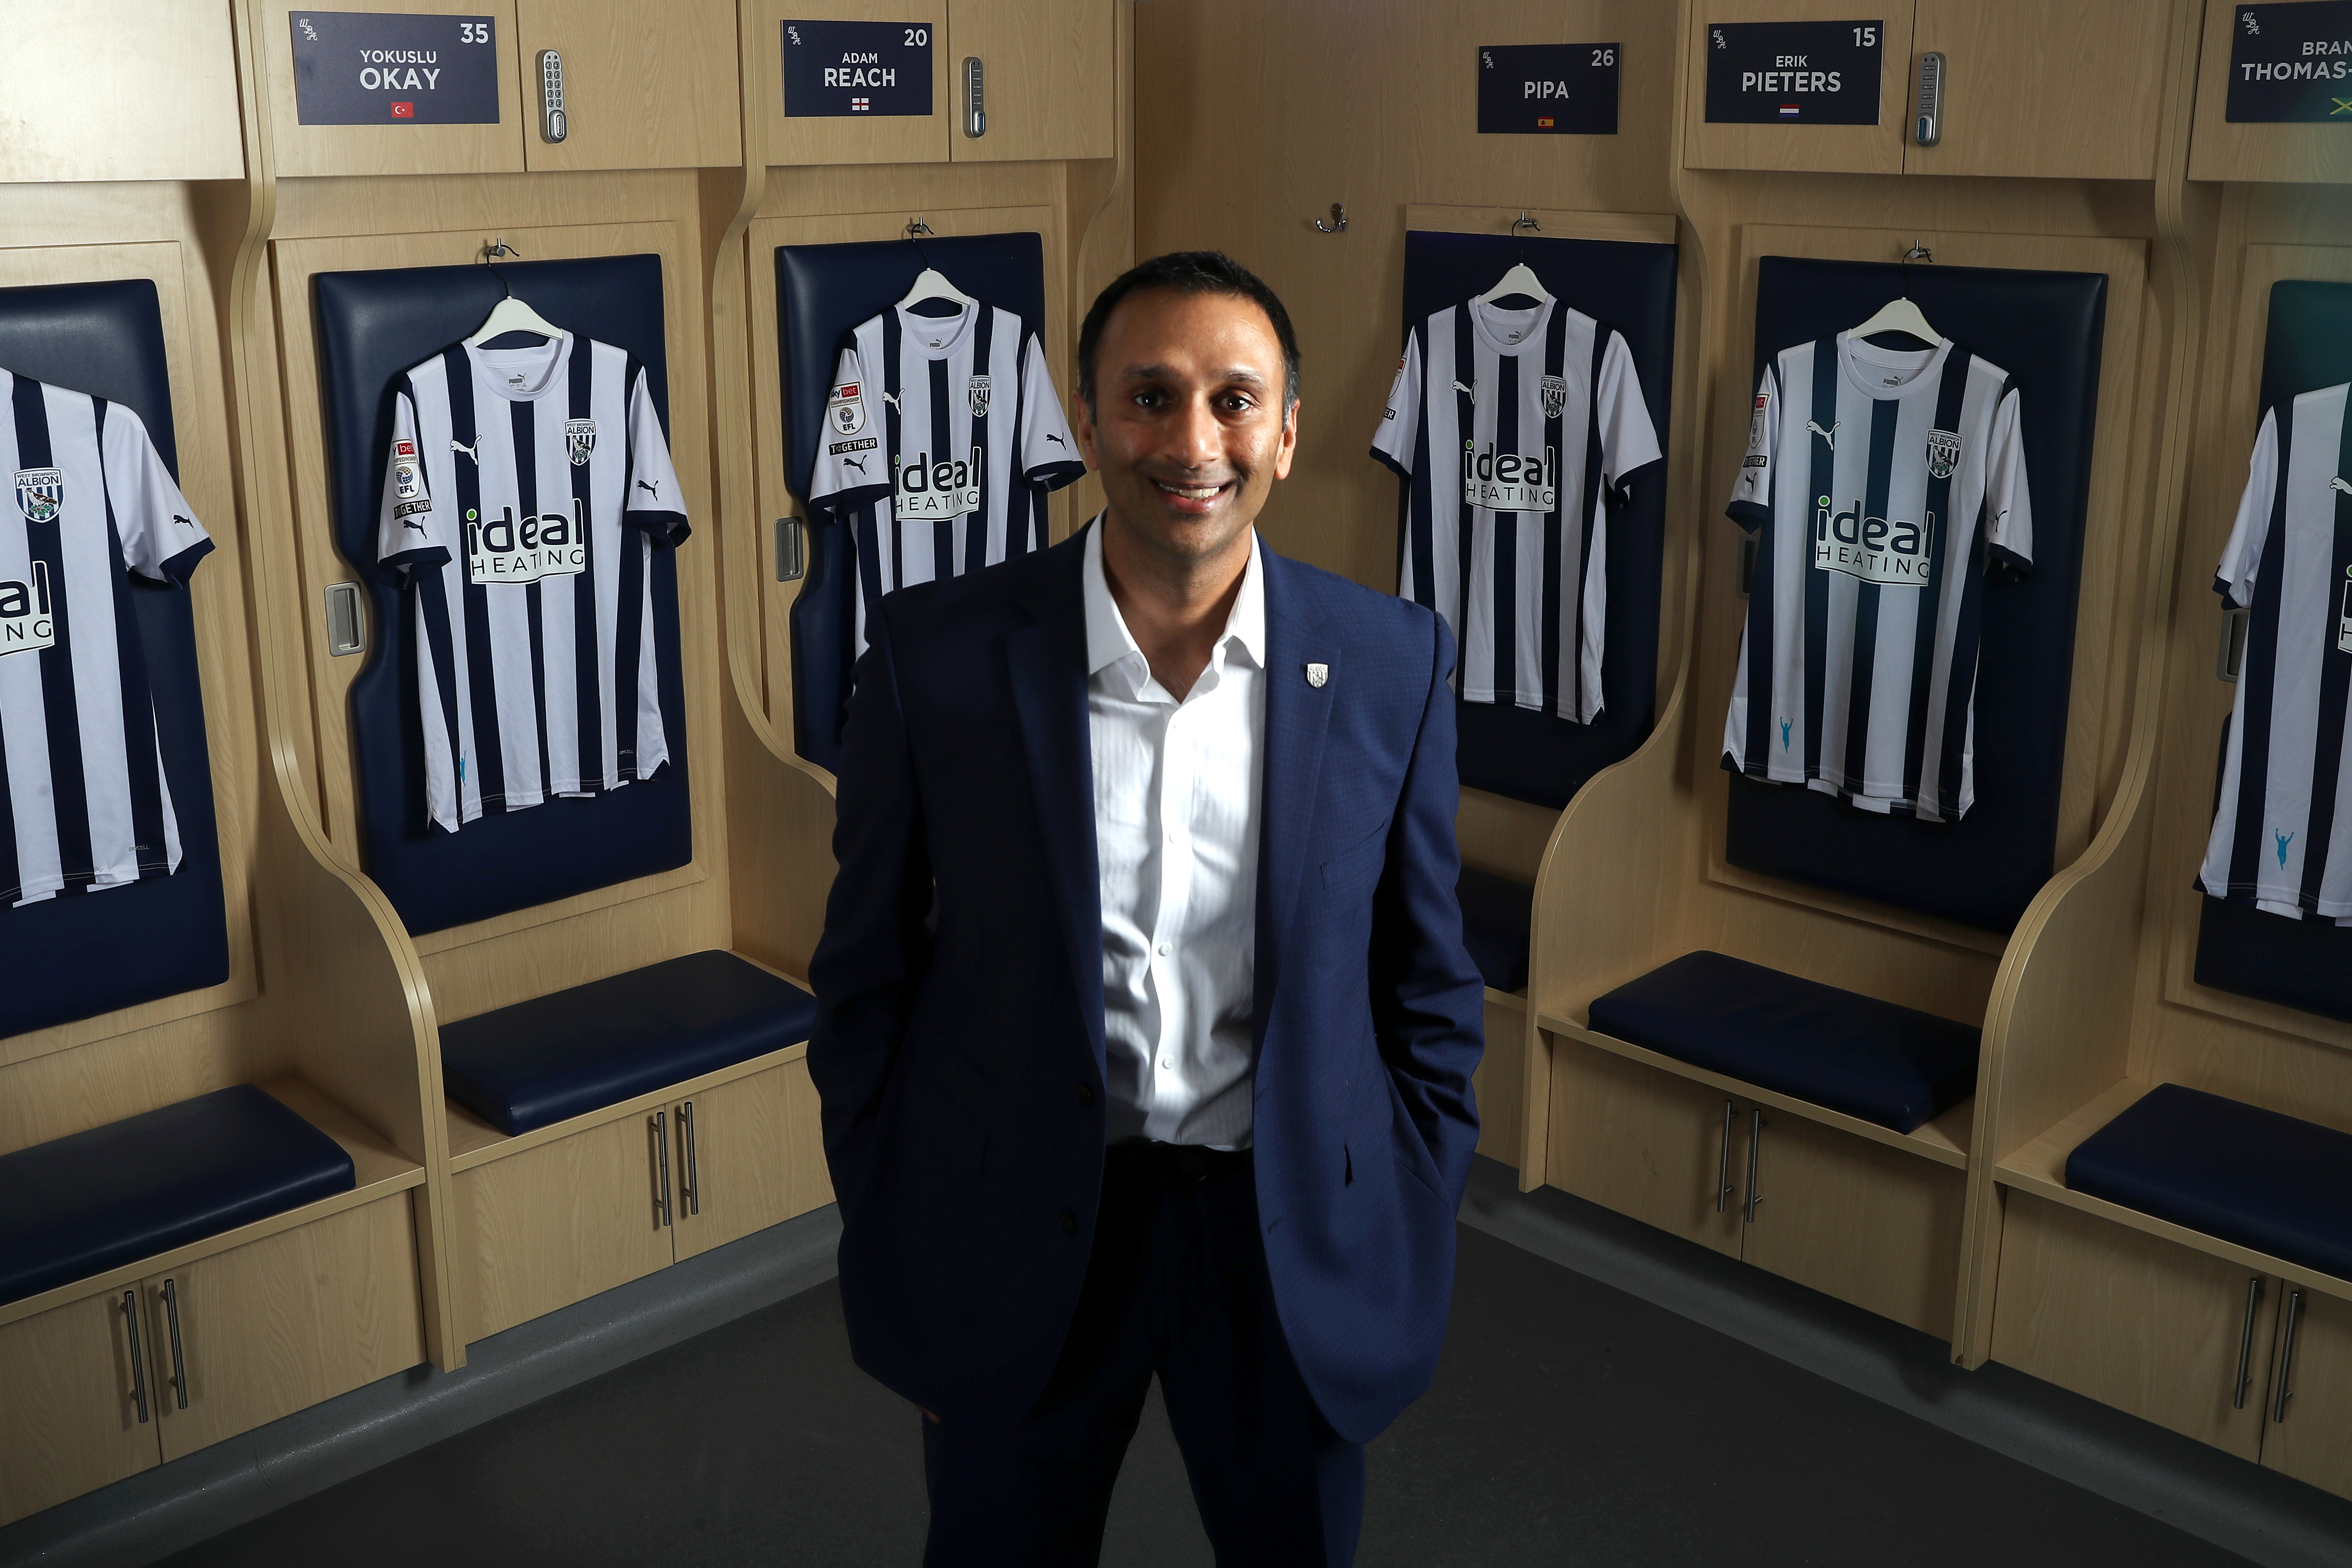 Shilen Patel stood up in the home dressing room with several home shirts hanging up behind him